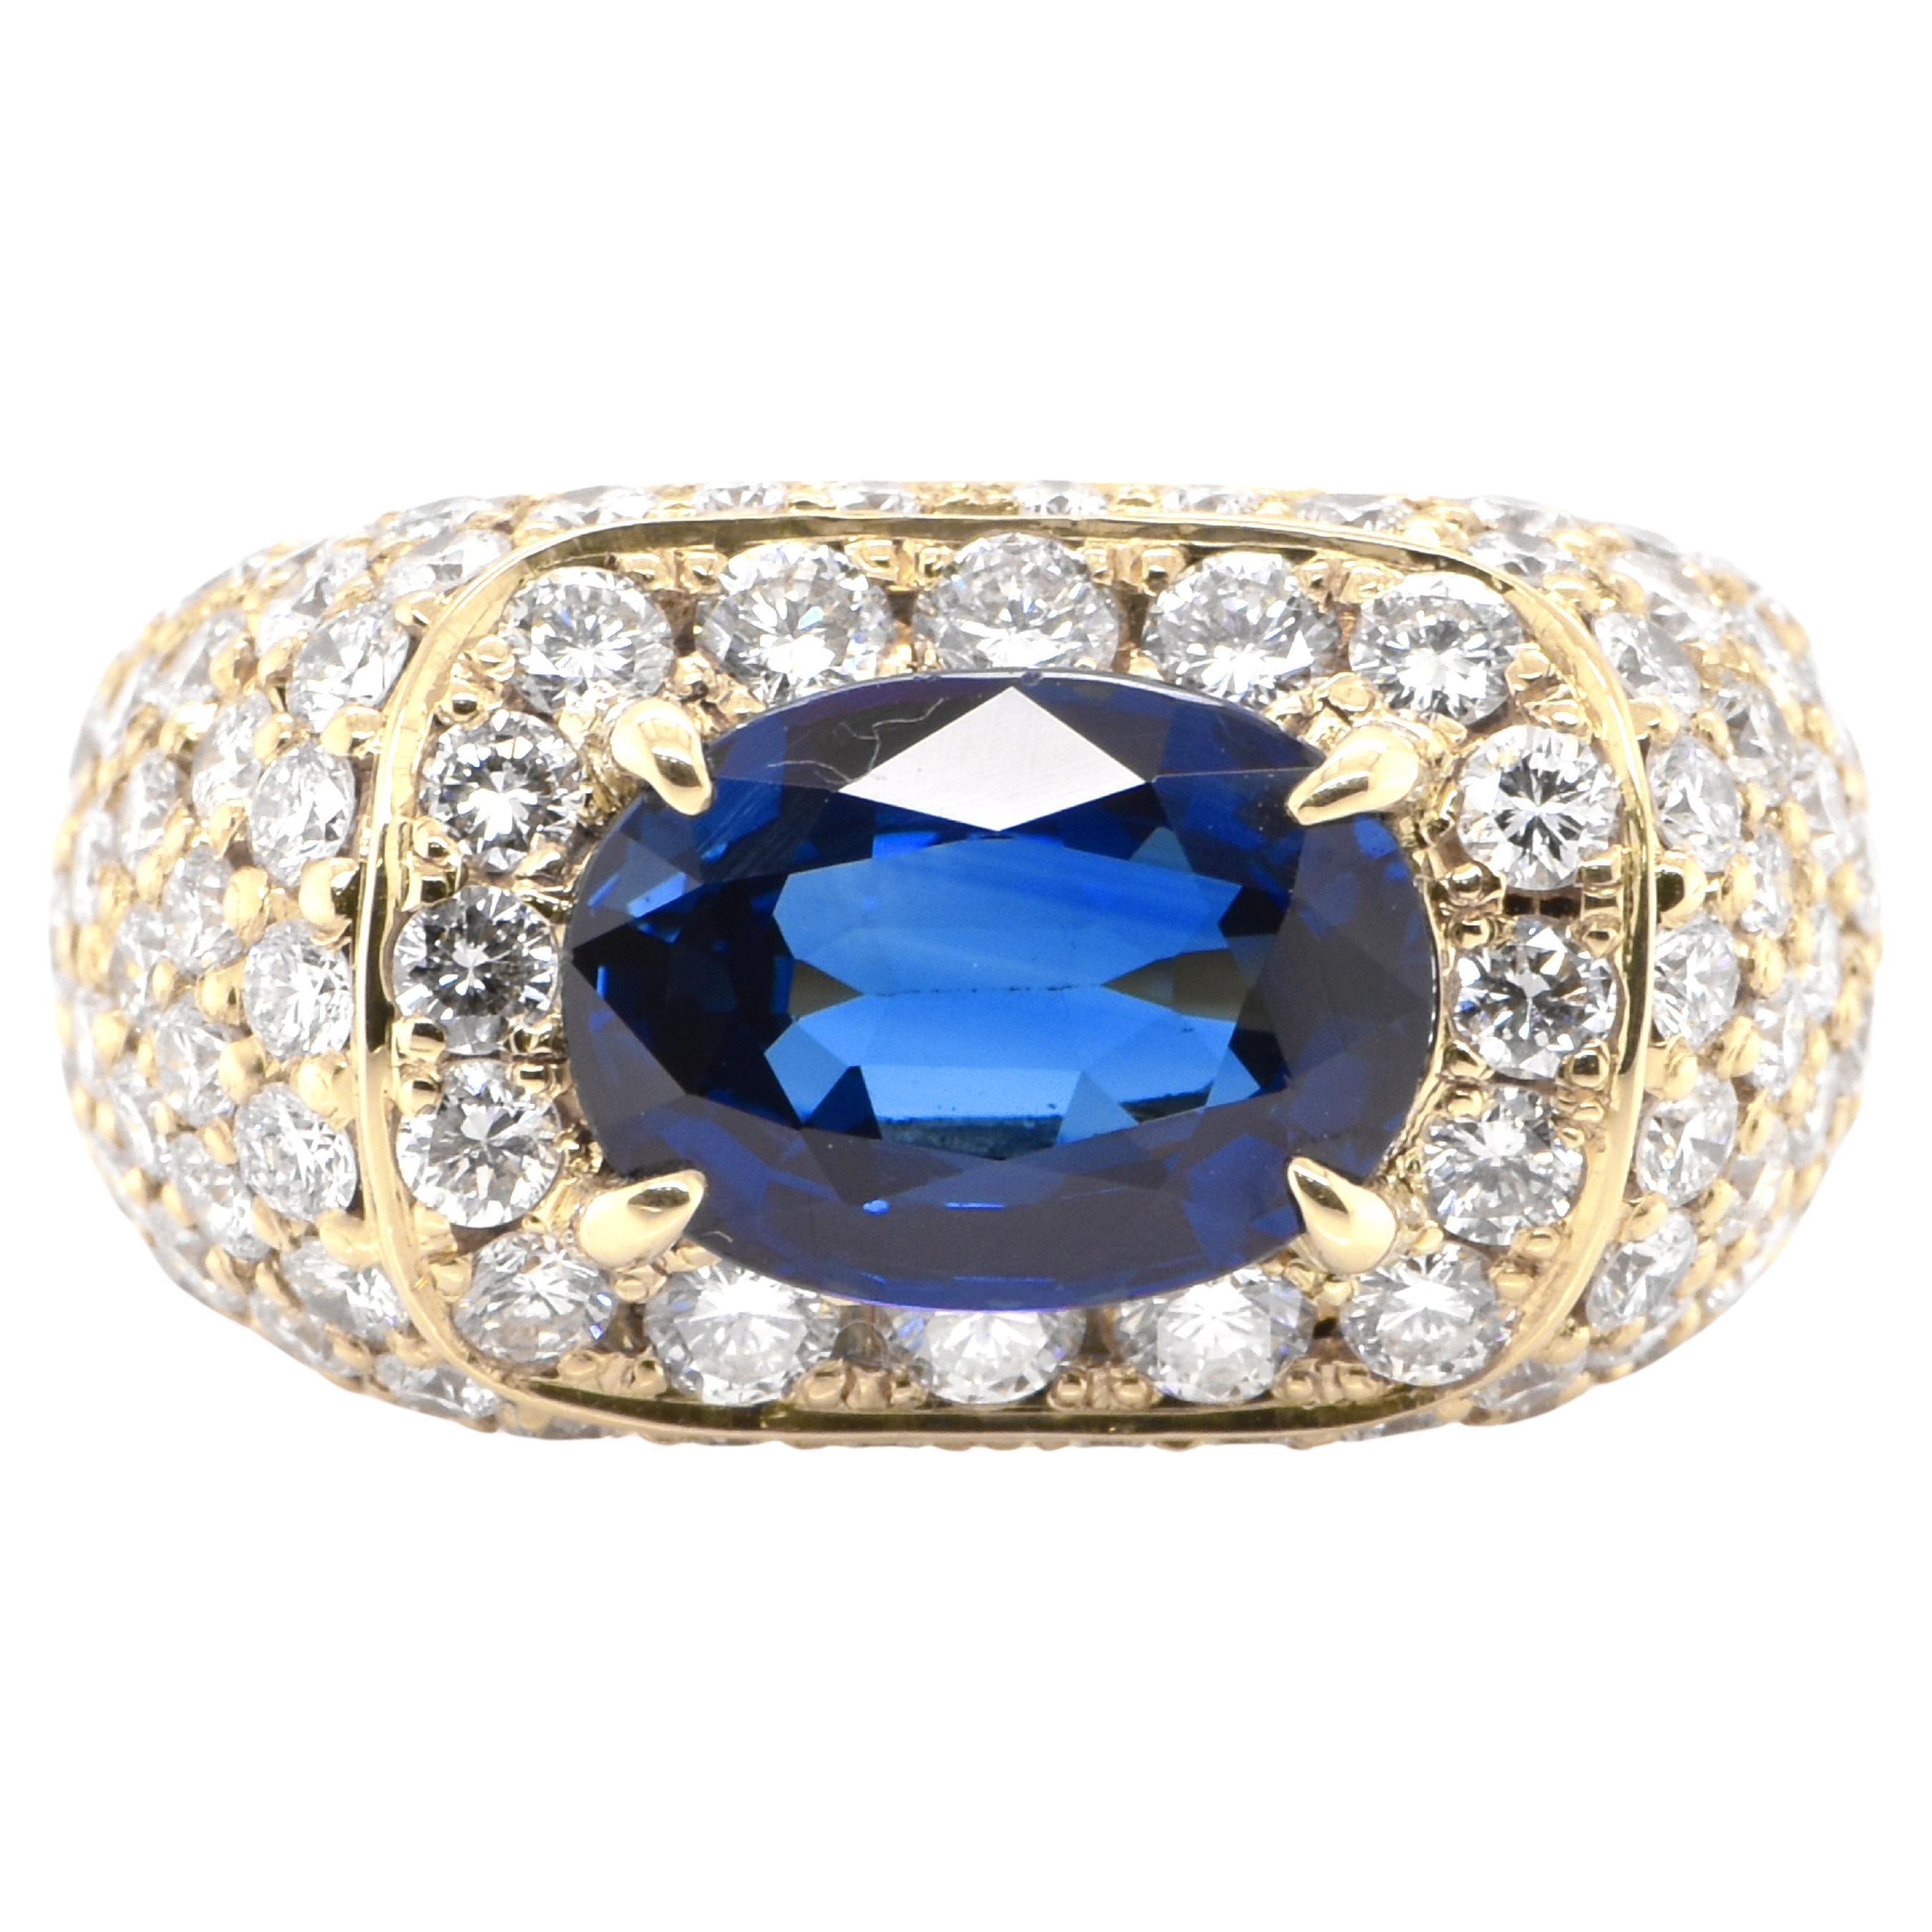 3.47 Carat Natural Sapphire and Diamond Cocktail Ring Set in 18K Yellow Gold